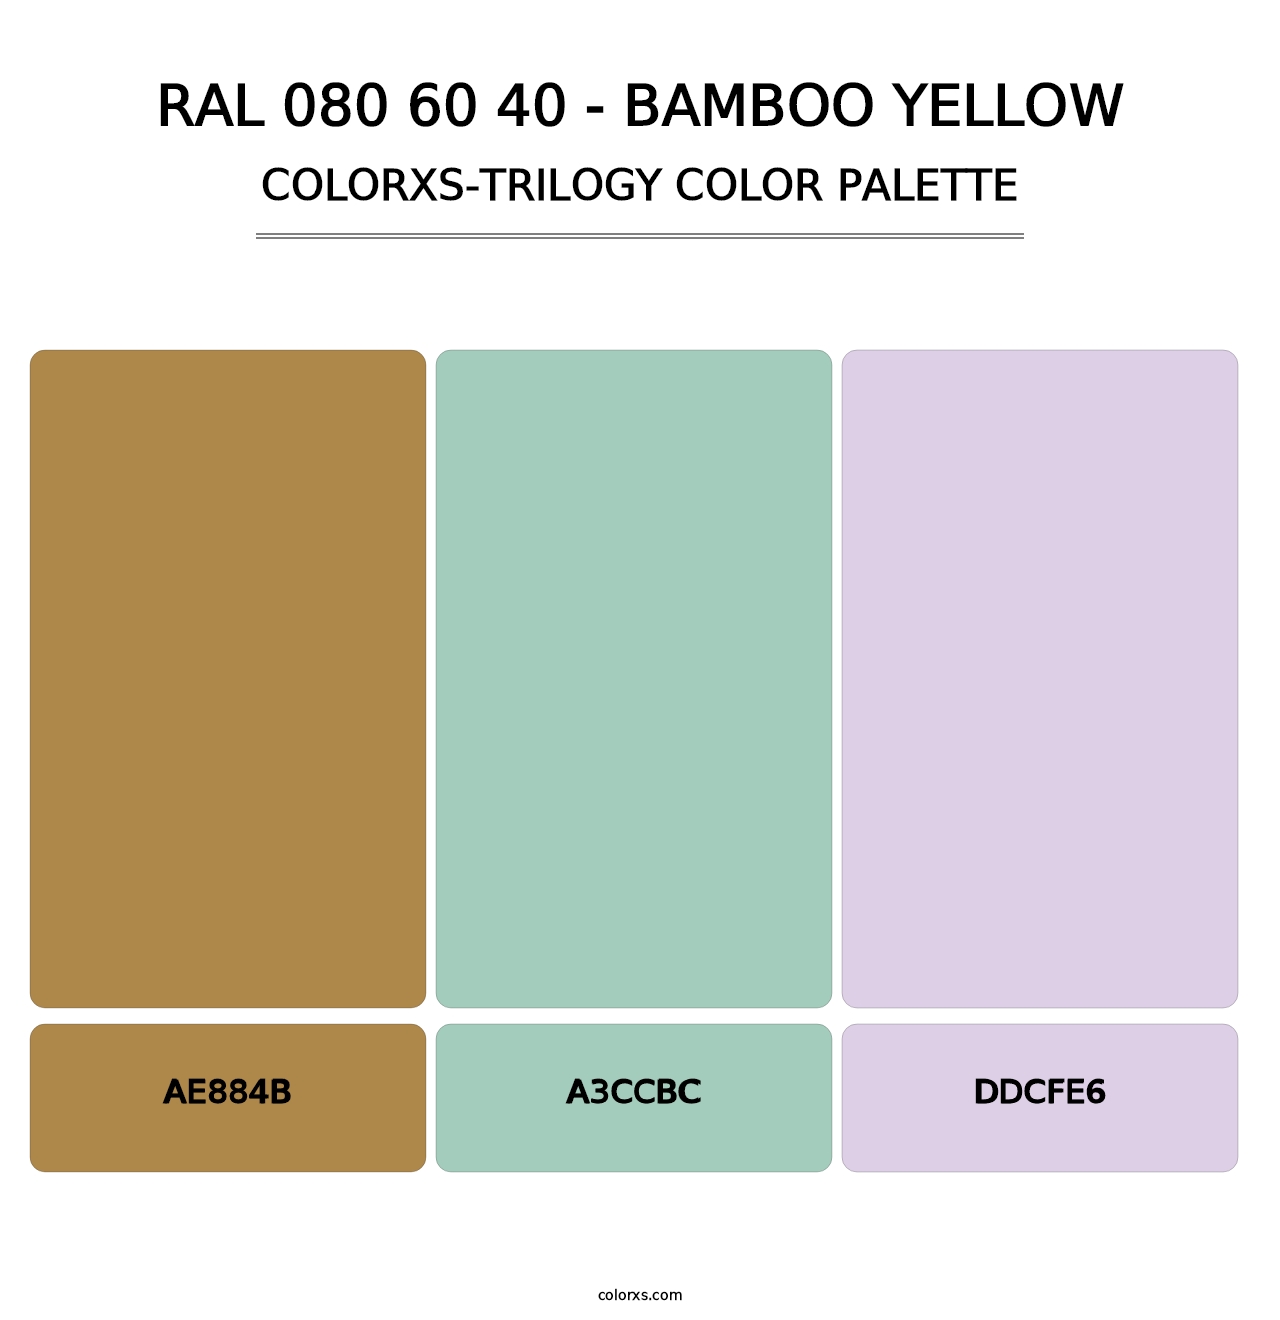 RAL 080 60 40 - Bamboo Yellow - Colorxs Trilogy Palette